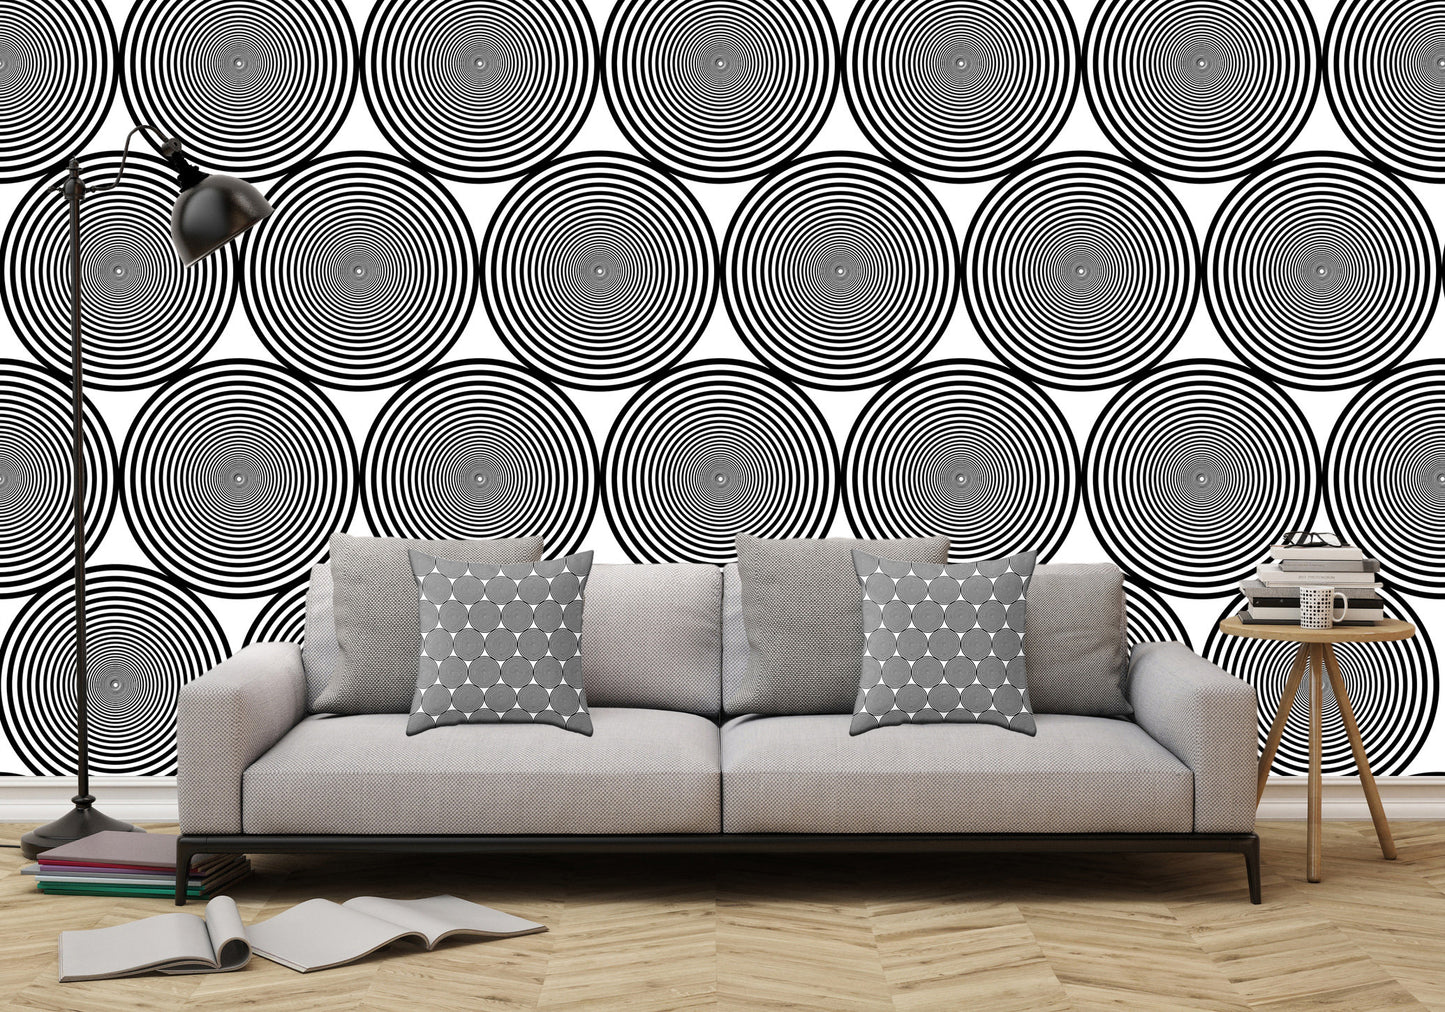 Hypnotic Black and White Circle Pattern - Adhesive Wallpaper - Removable Wallpaper - Wall Sticker - Full Size Wall Mural  - PIPAFINEART